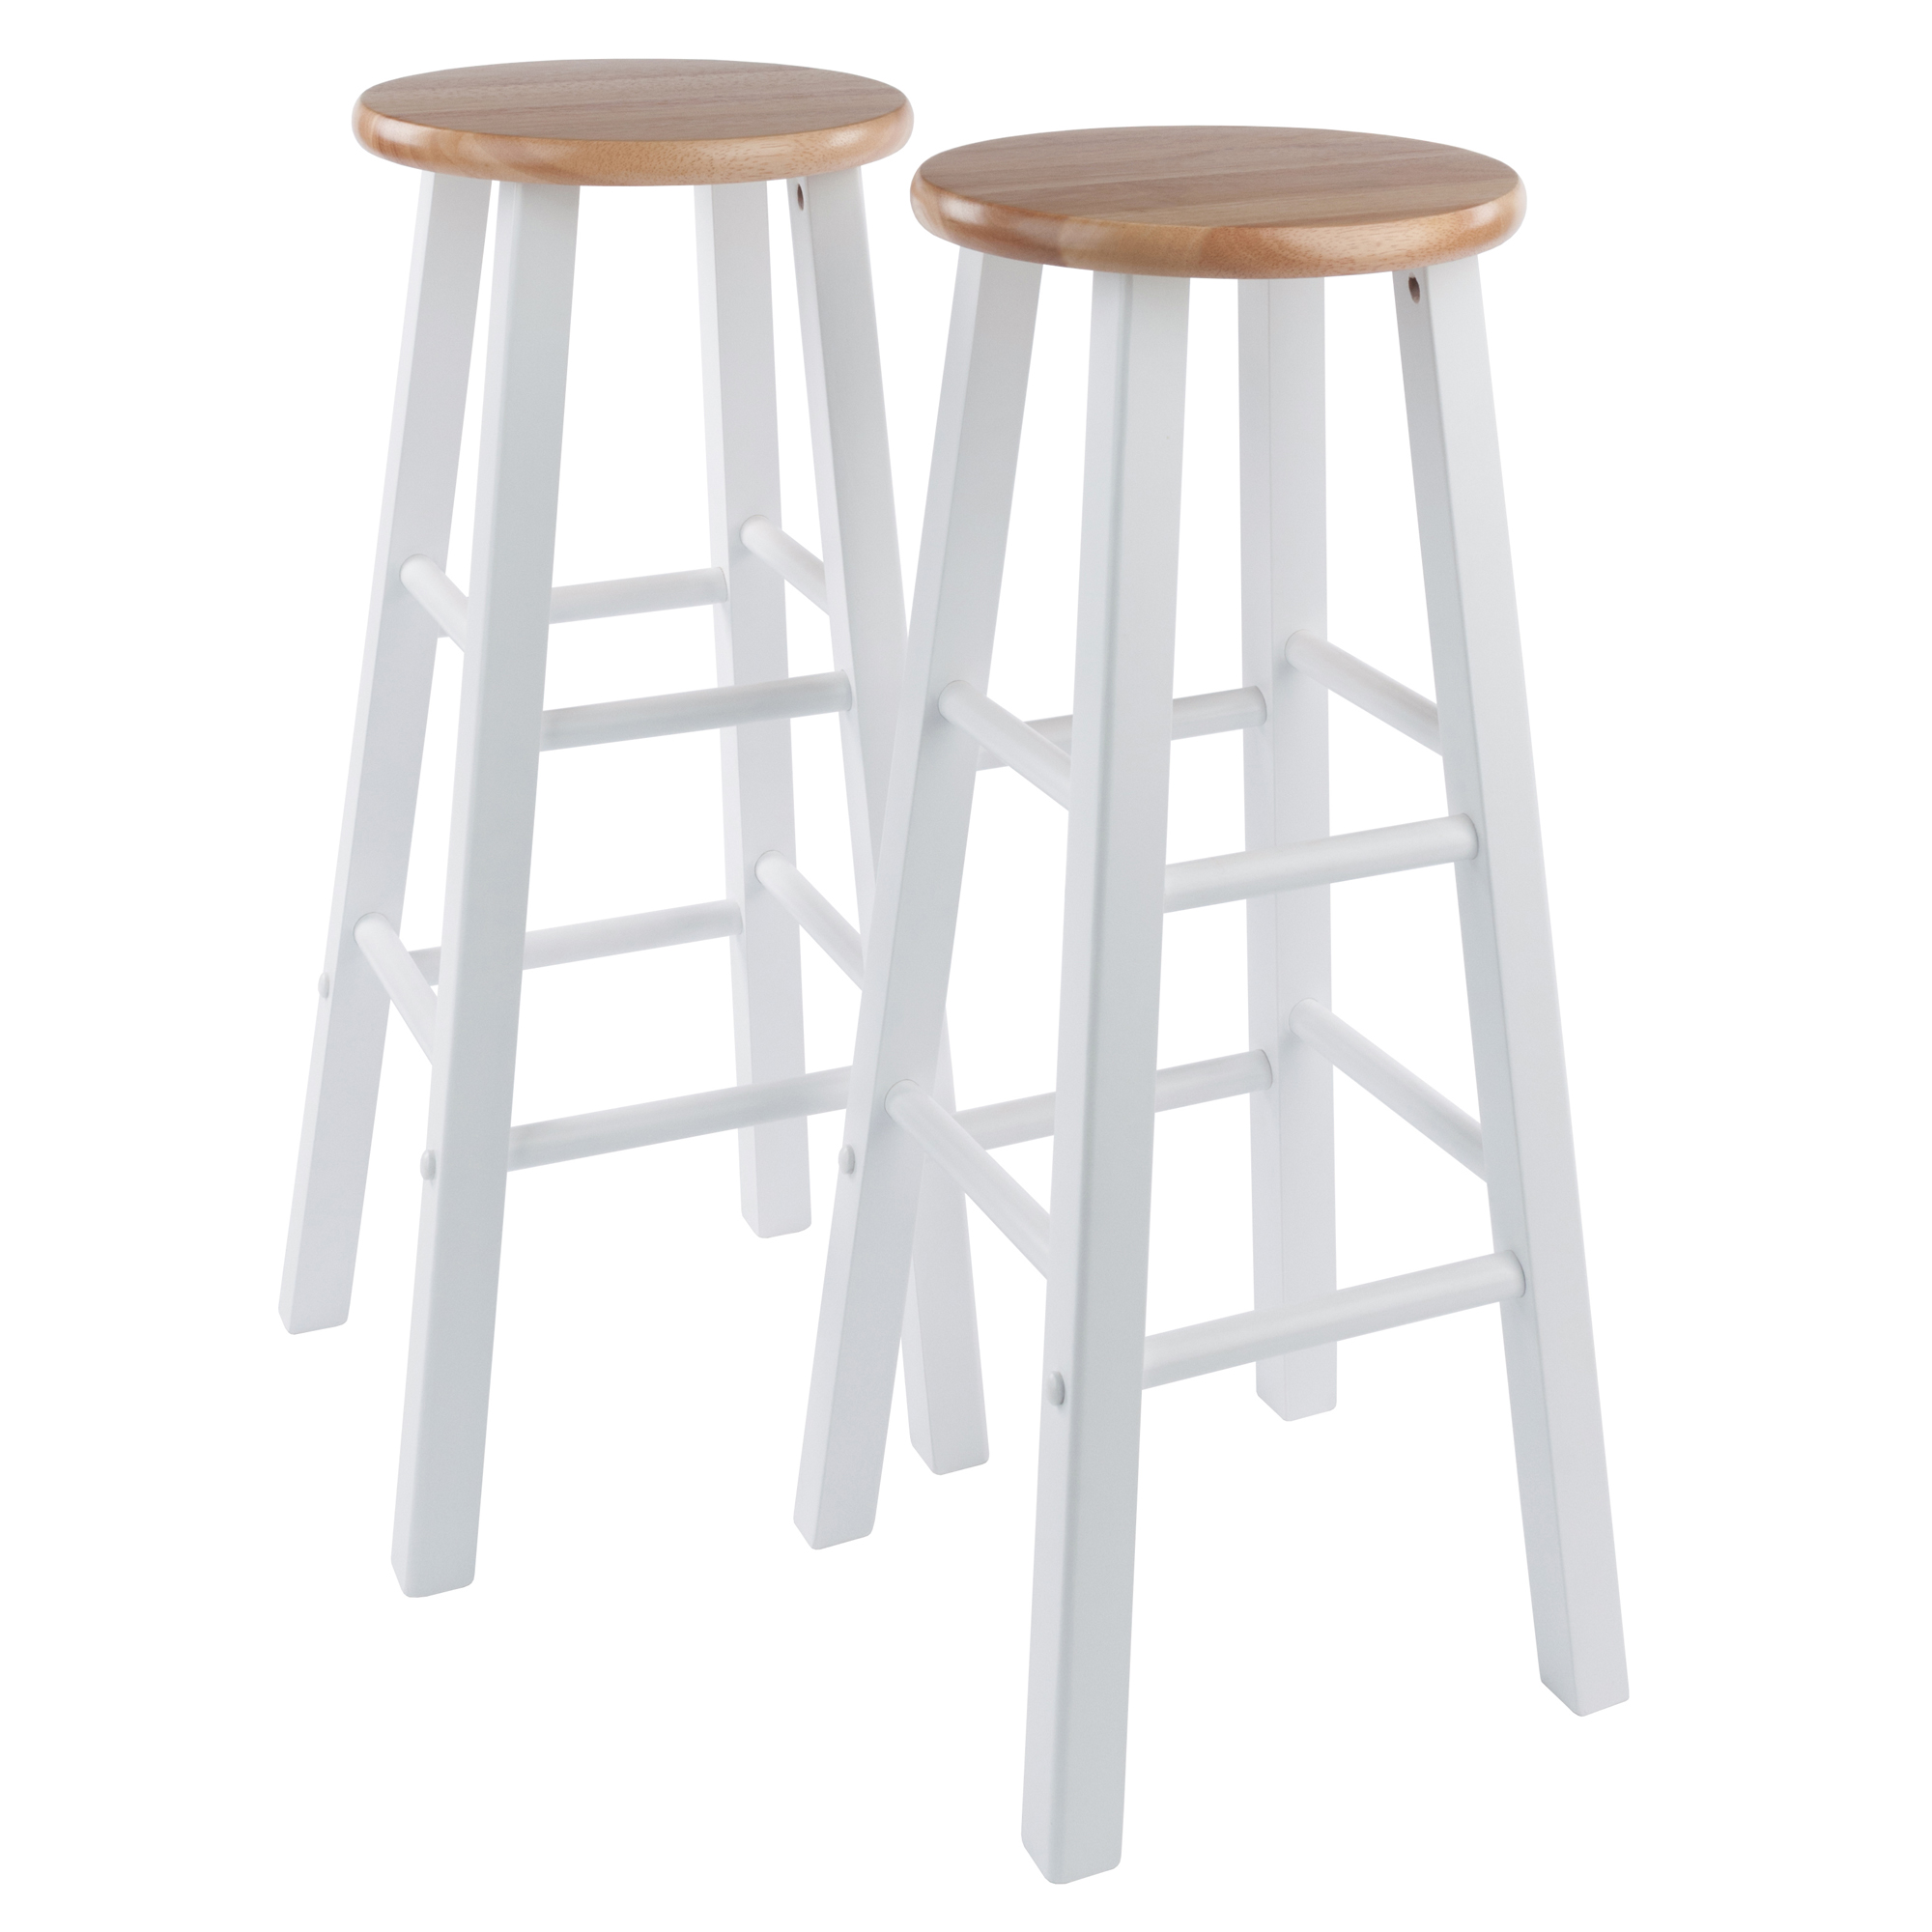 Winsome Wood Element 2-Piece Bar Stools, Natural & White Finish - image 1 of 6